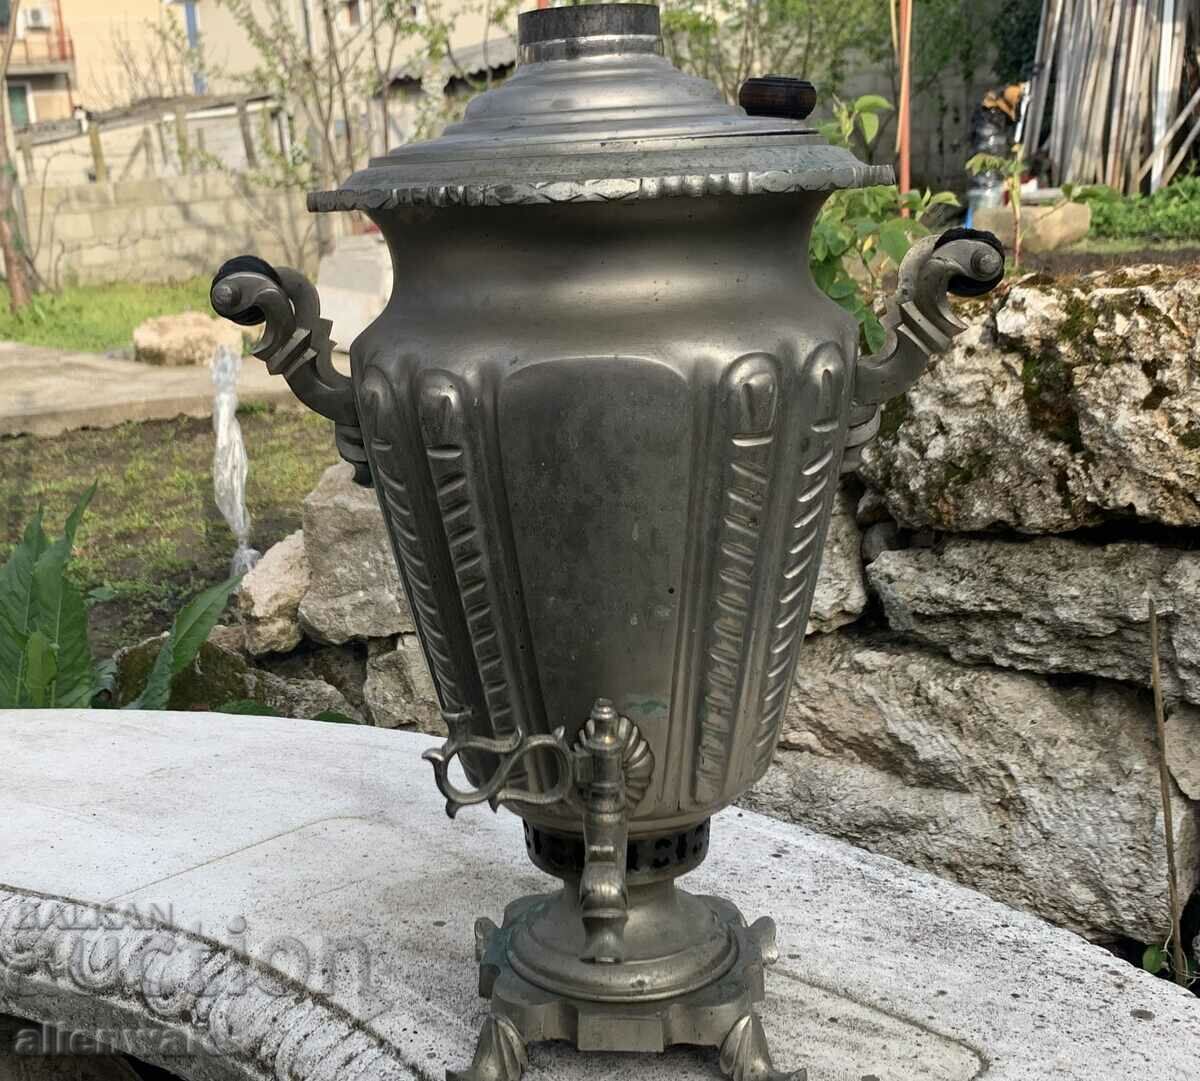 Vintage large Russian coal samovar from the 19th century.